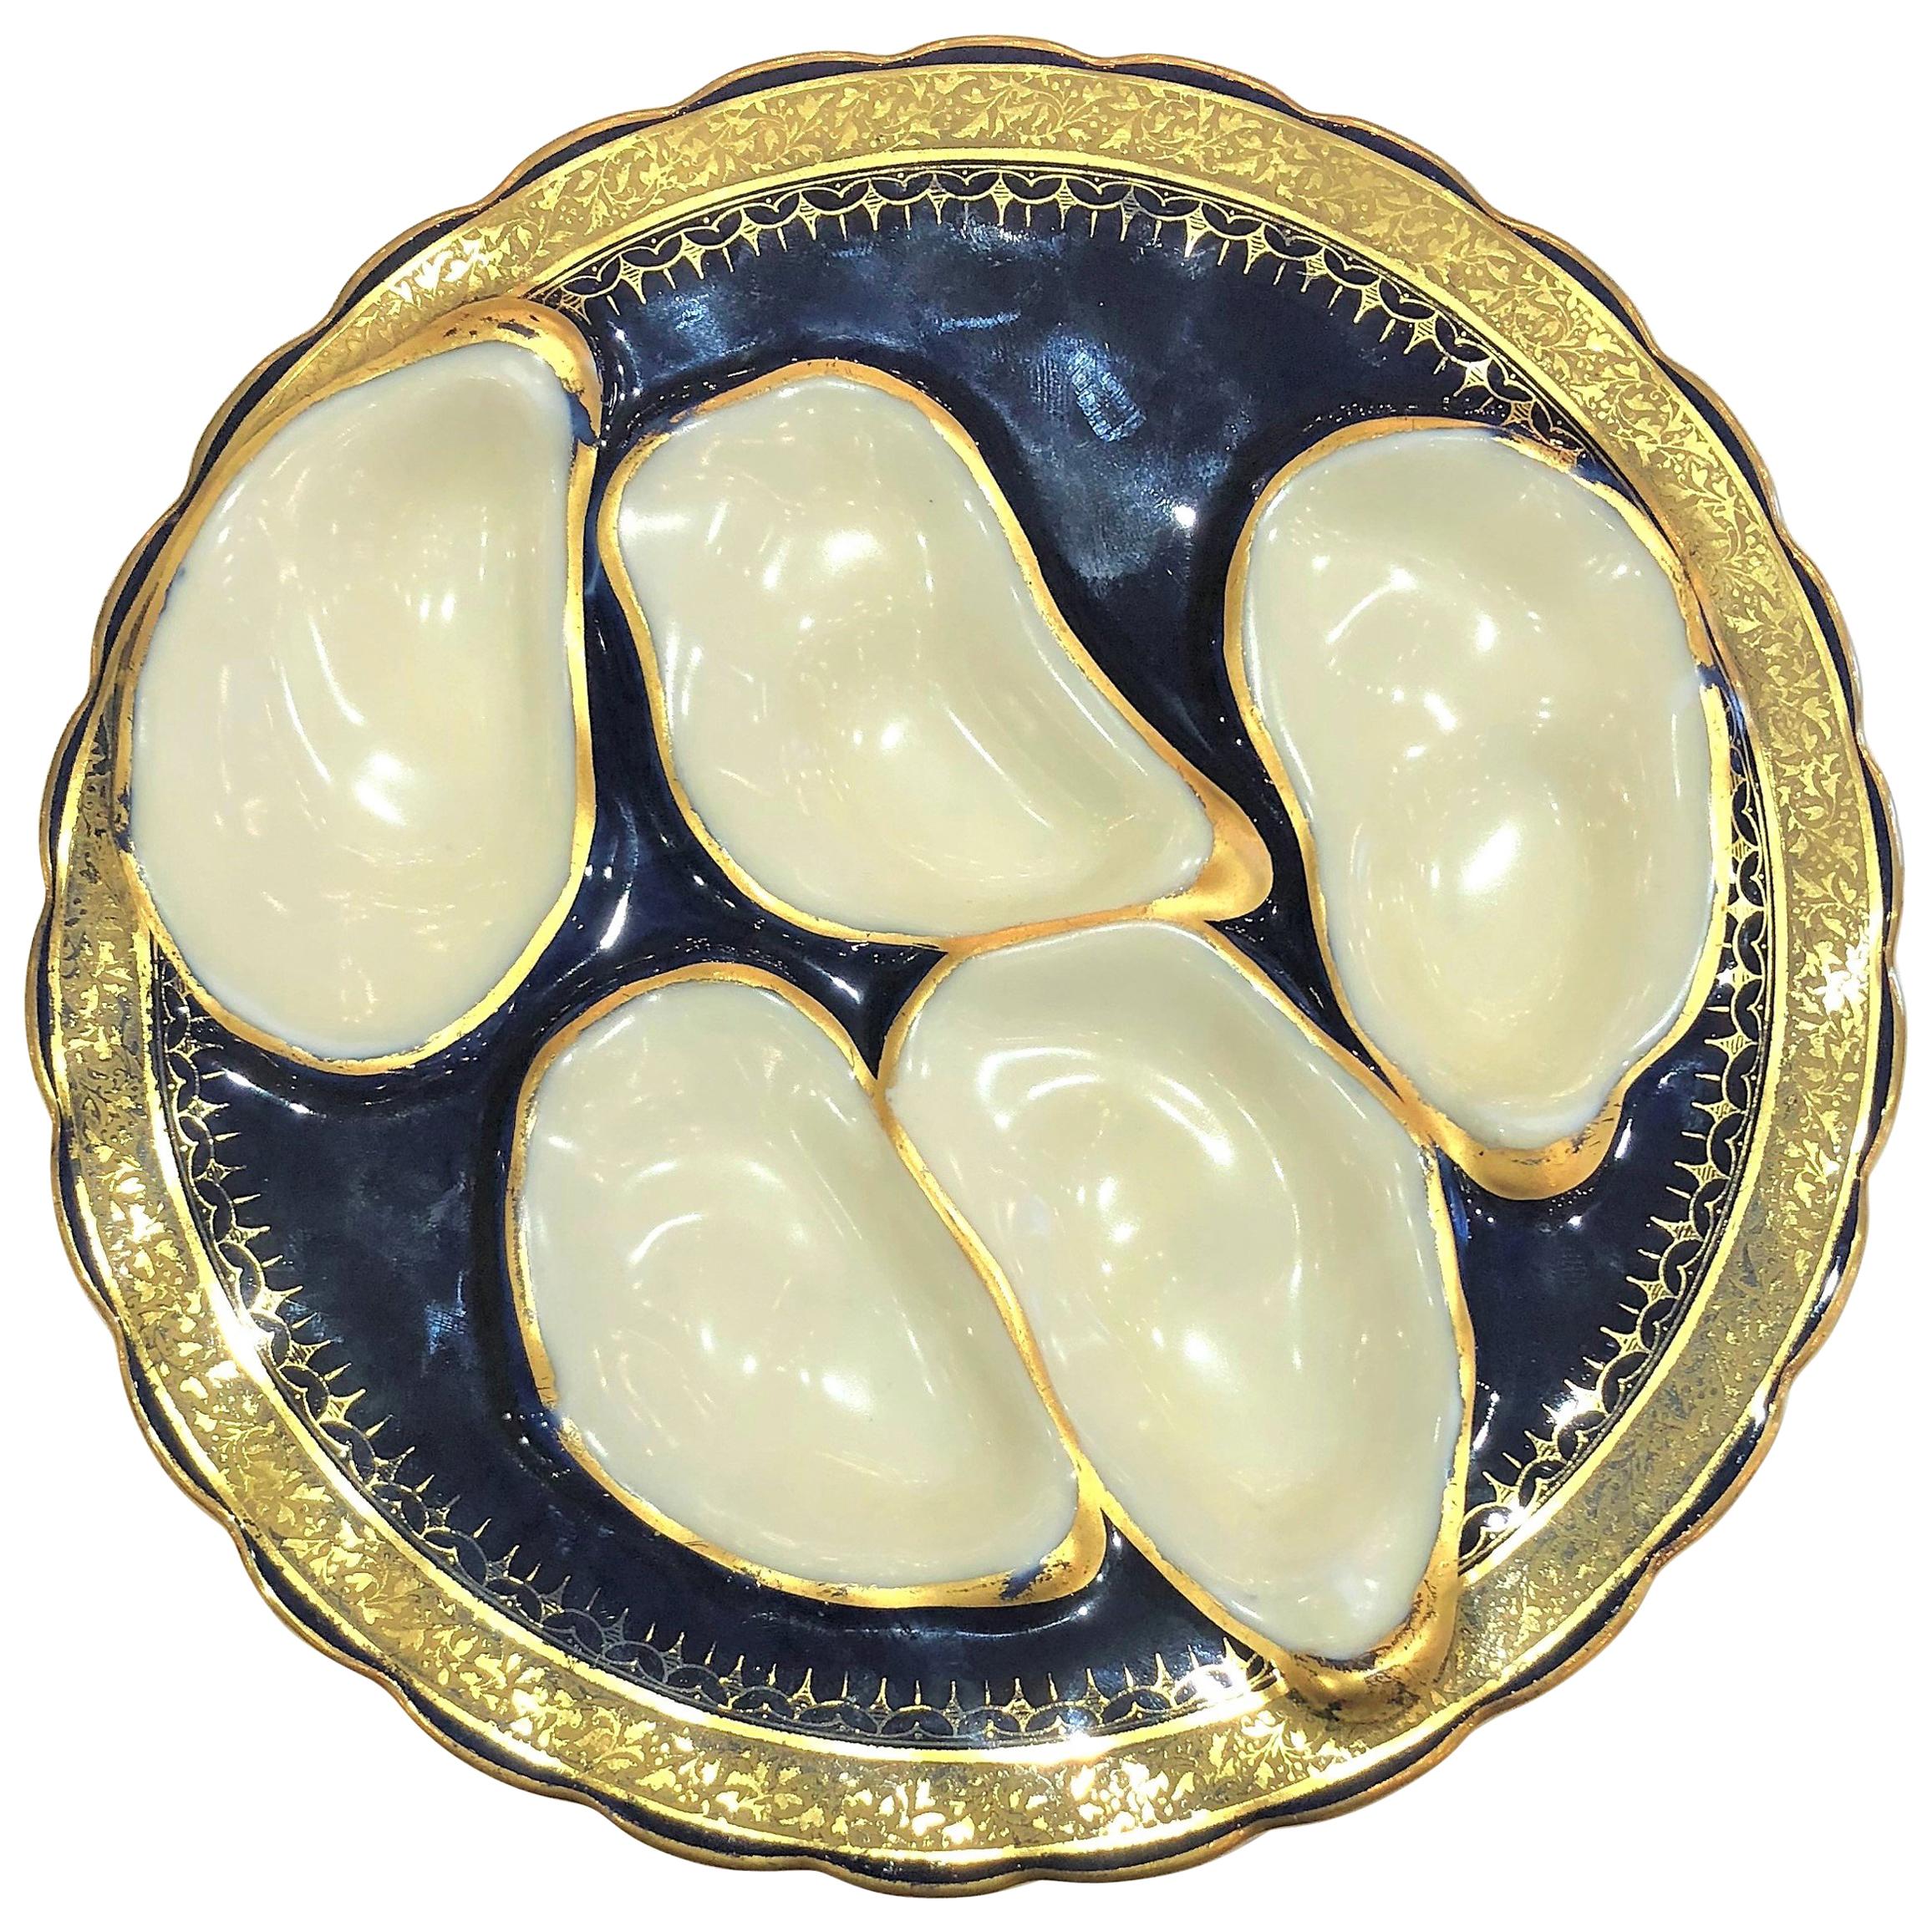 Antique French Hand-Painted Limoges Porcelain Oyster Plate, circa 1870-1880